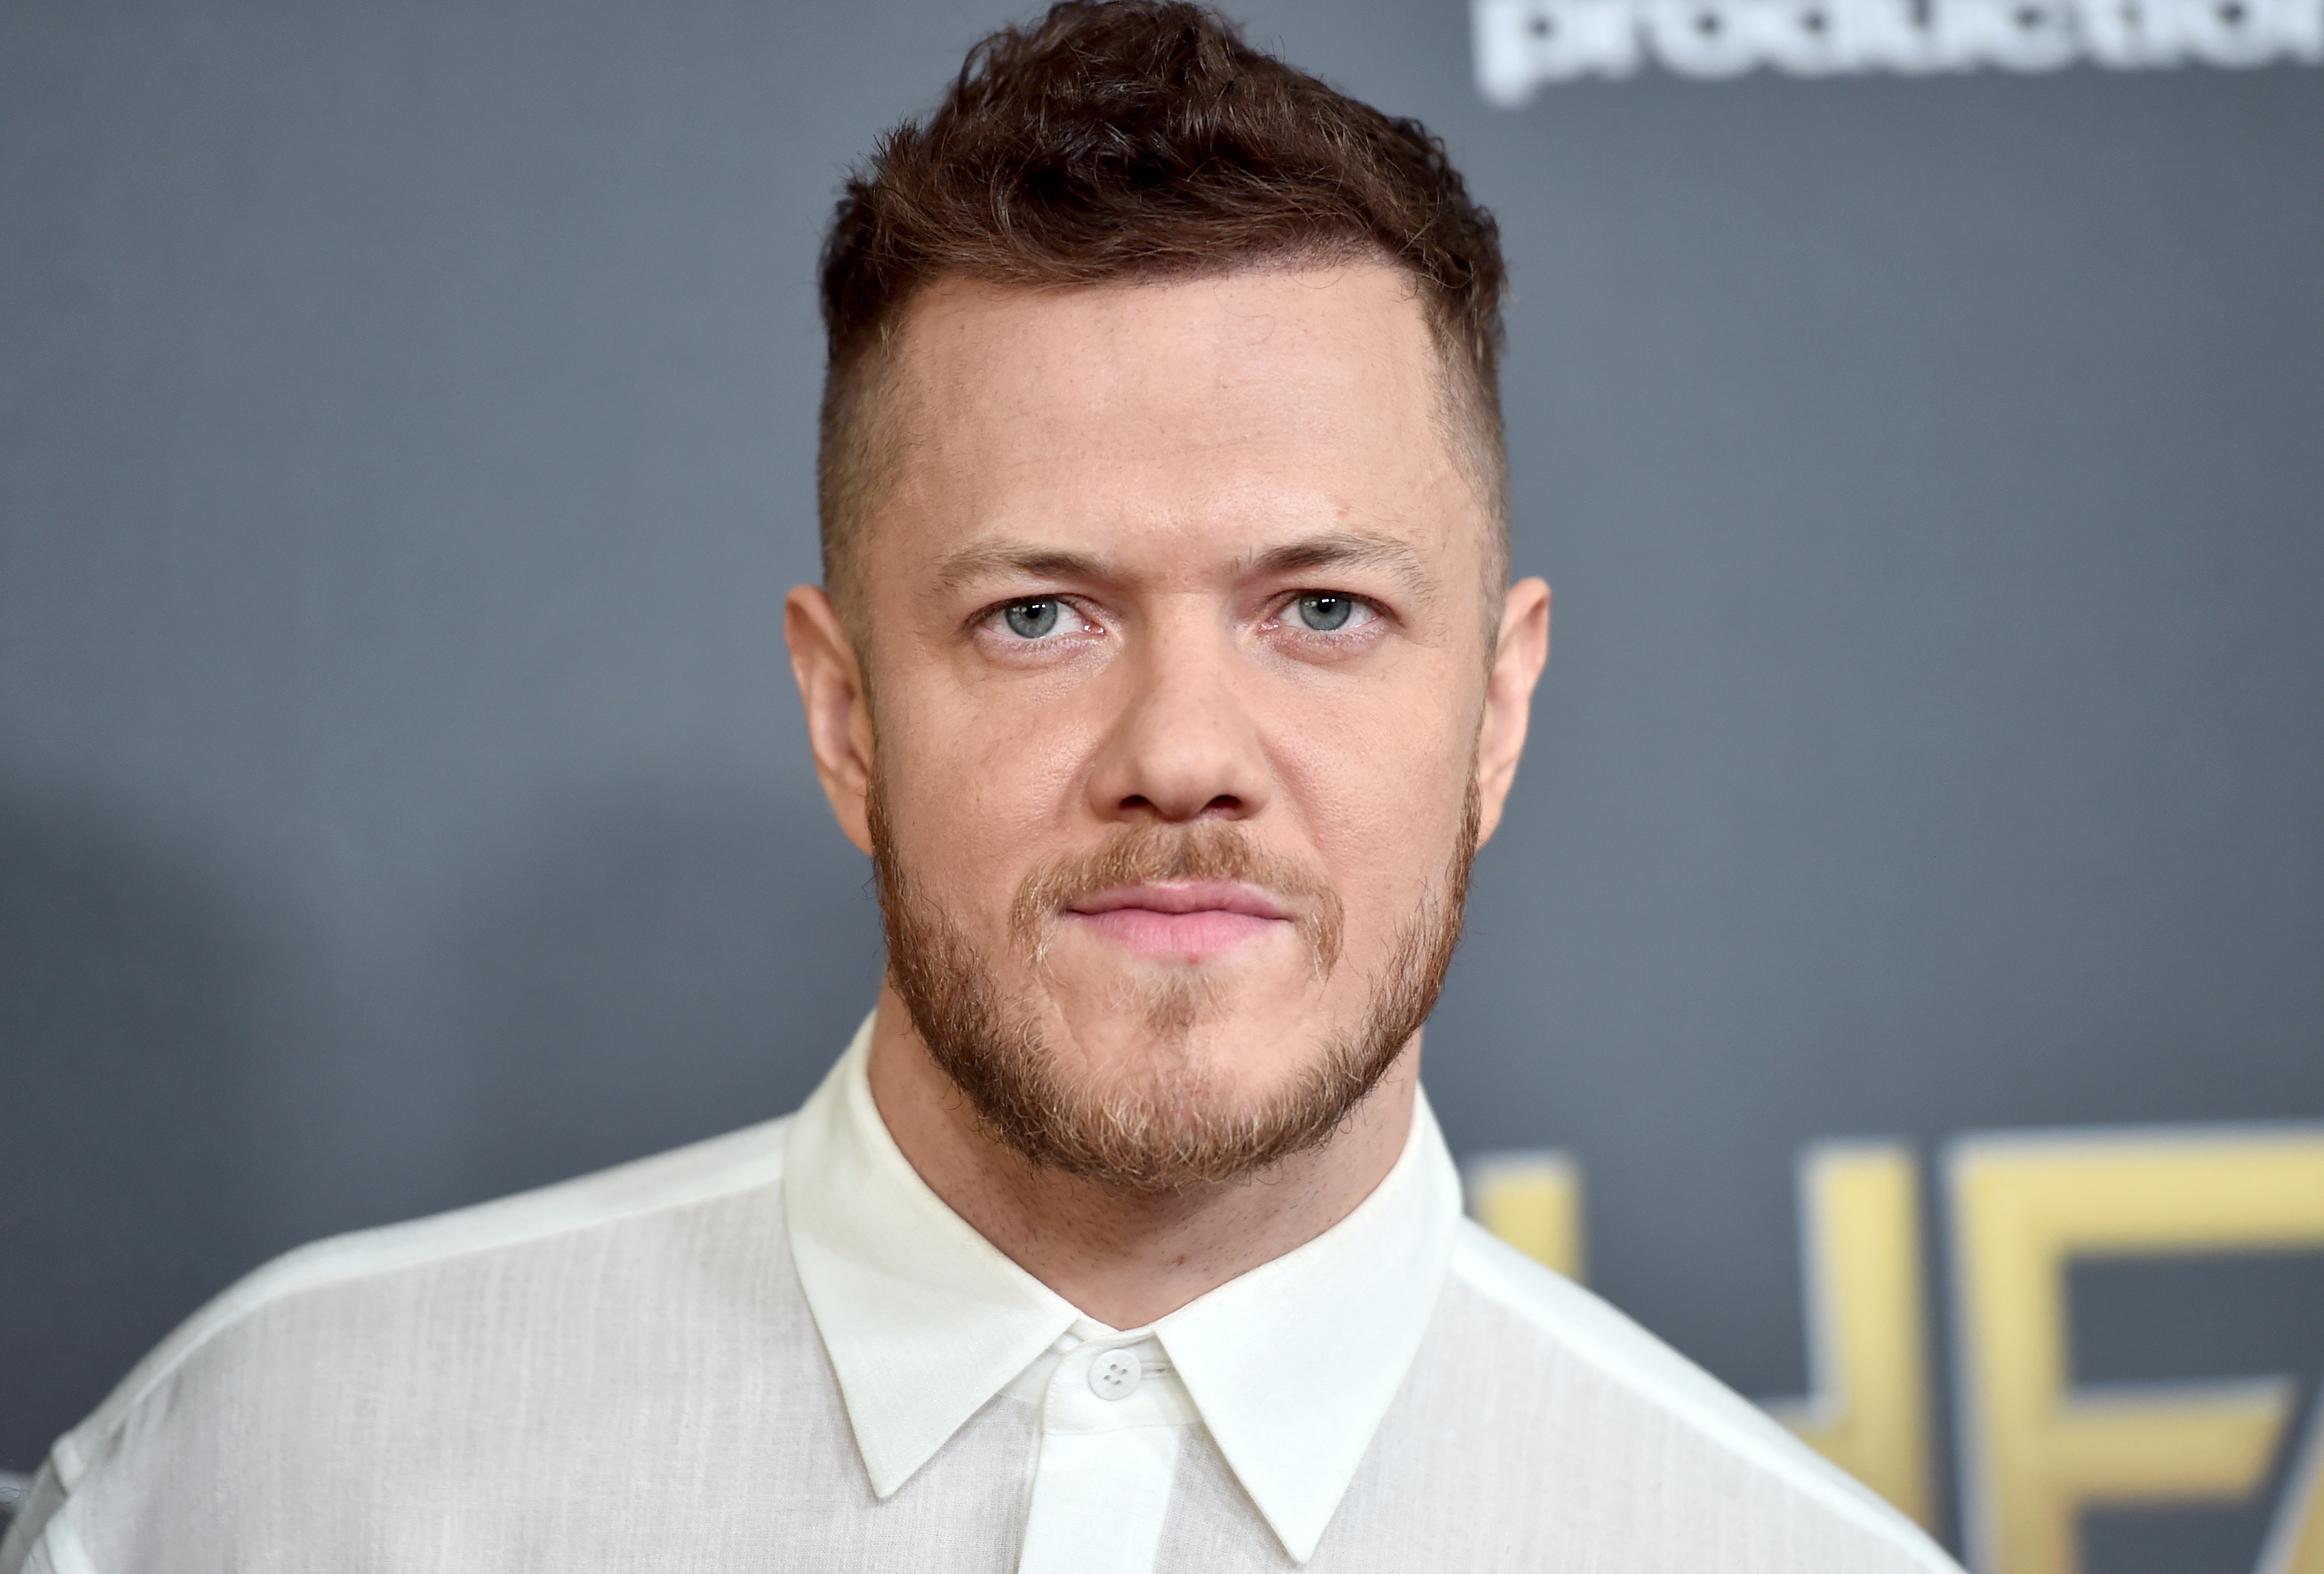 Dan Reynolds of Imagine Dragons attends the 22nd Annual Hollywood Film Awards at The Beverly Hilton Hotel on November 4, 2018 in Beverly Hills, California. 